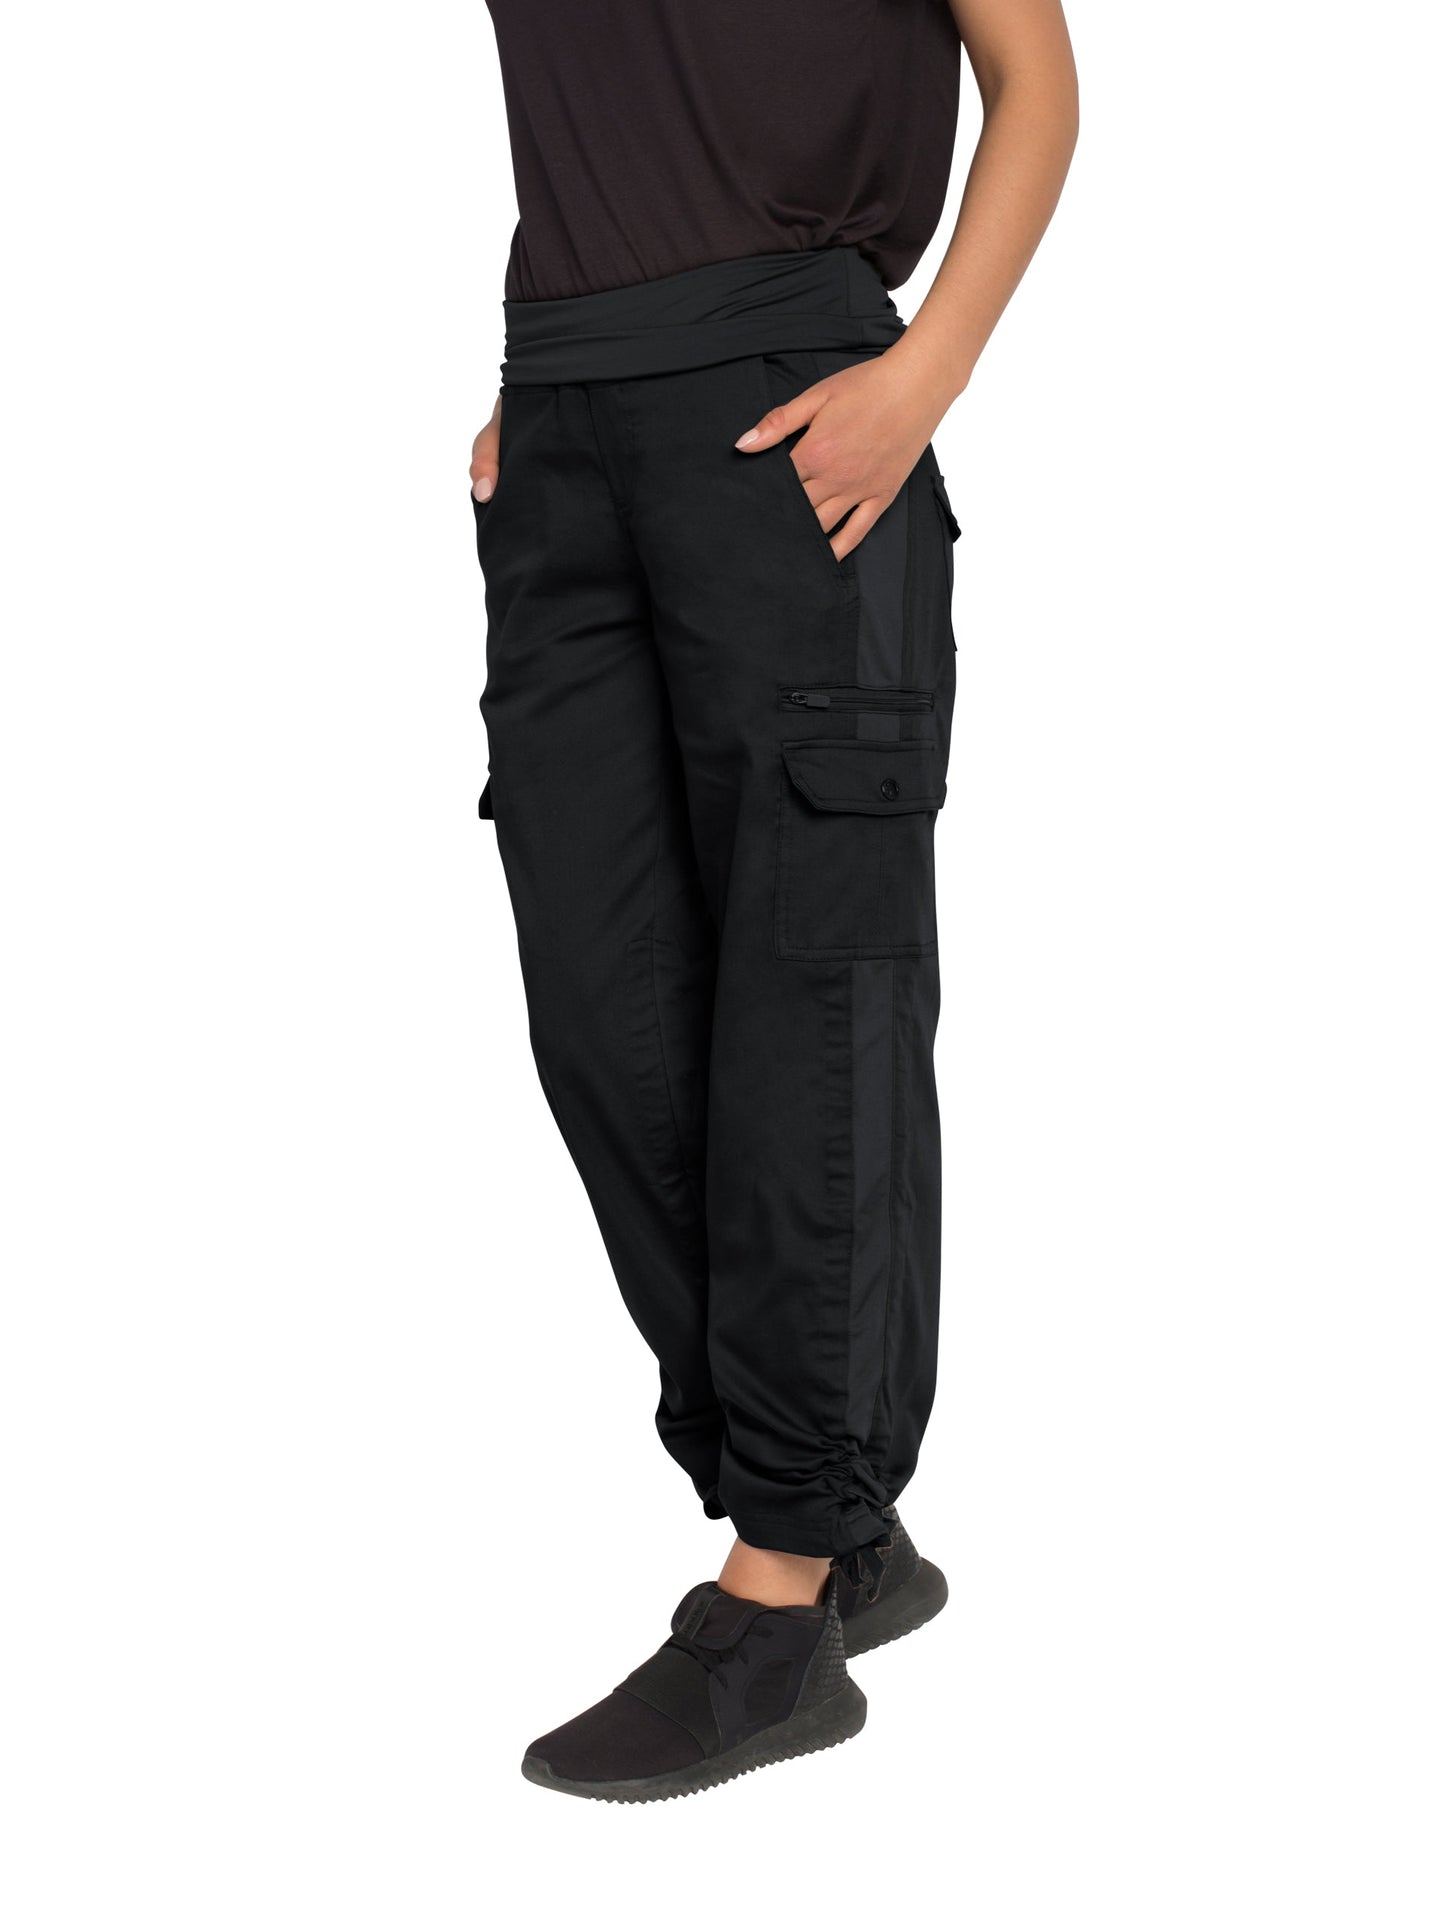 MARGAUX CARGAUX, Women's Travel Pants with Hidden Pockets